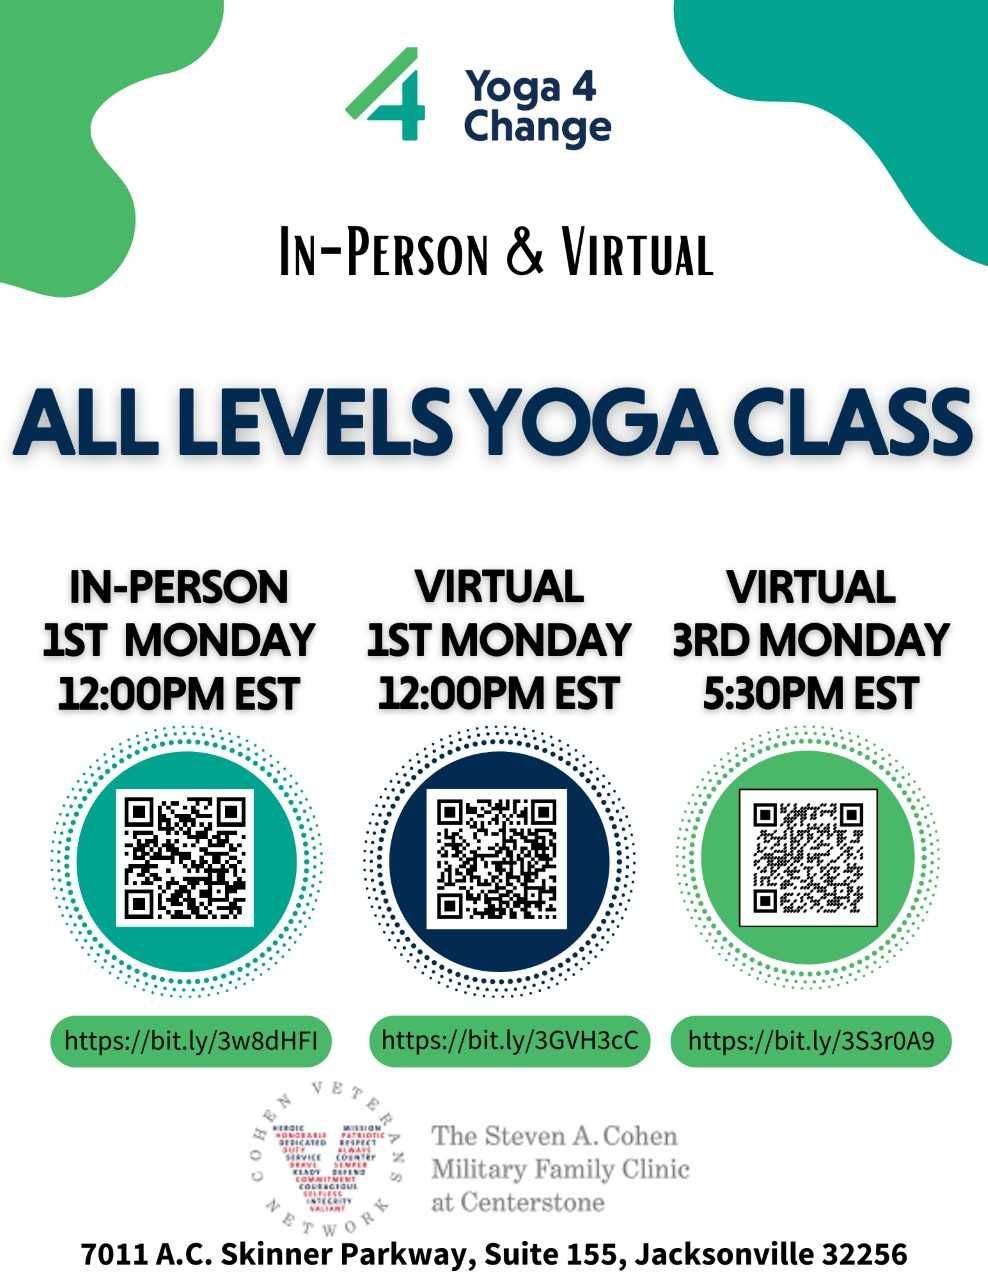 Yoga 4 Change In-Person All Levels Yoga Class